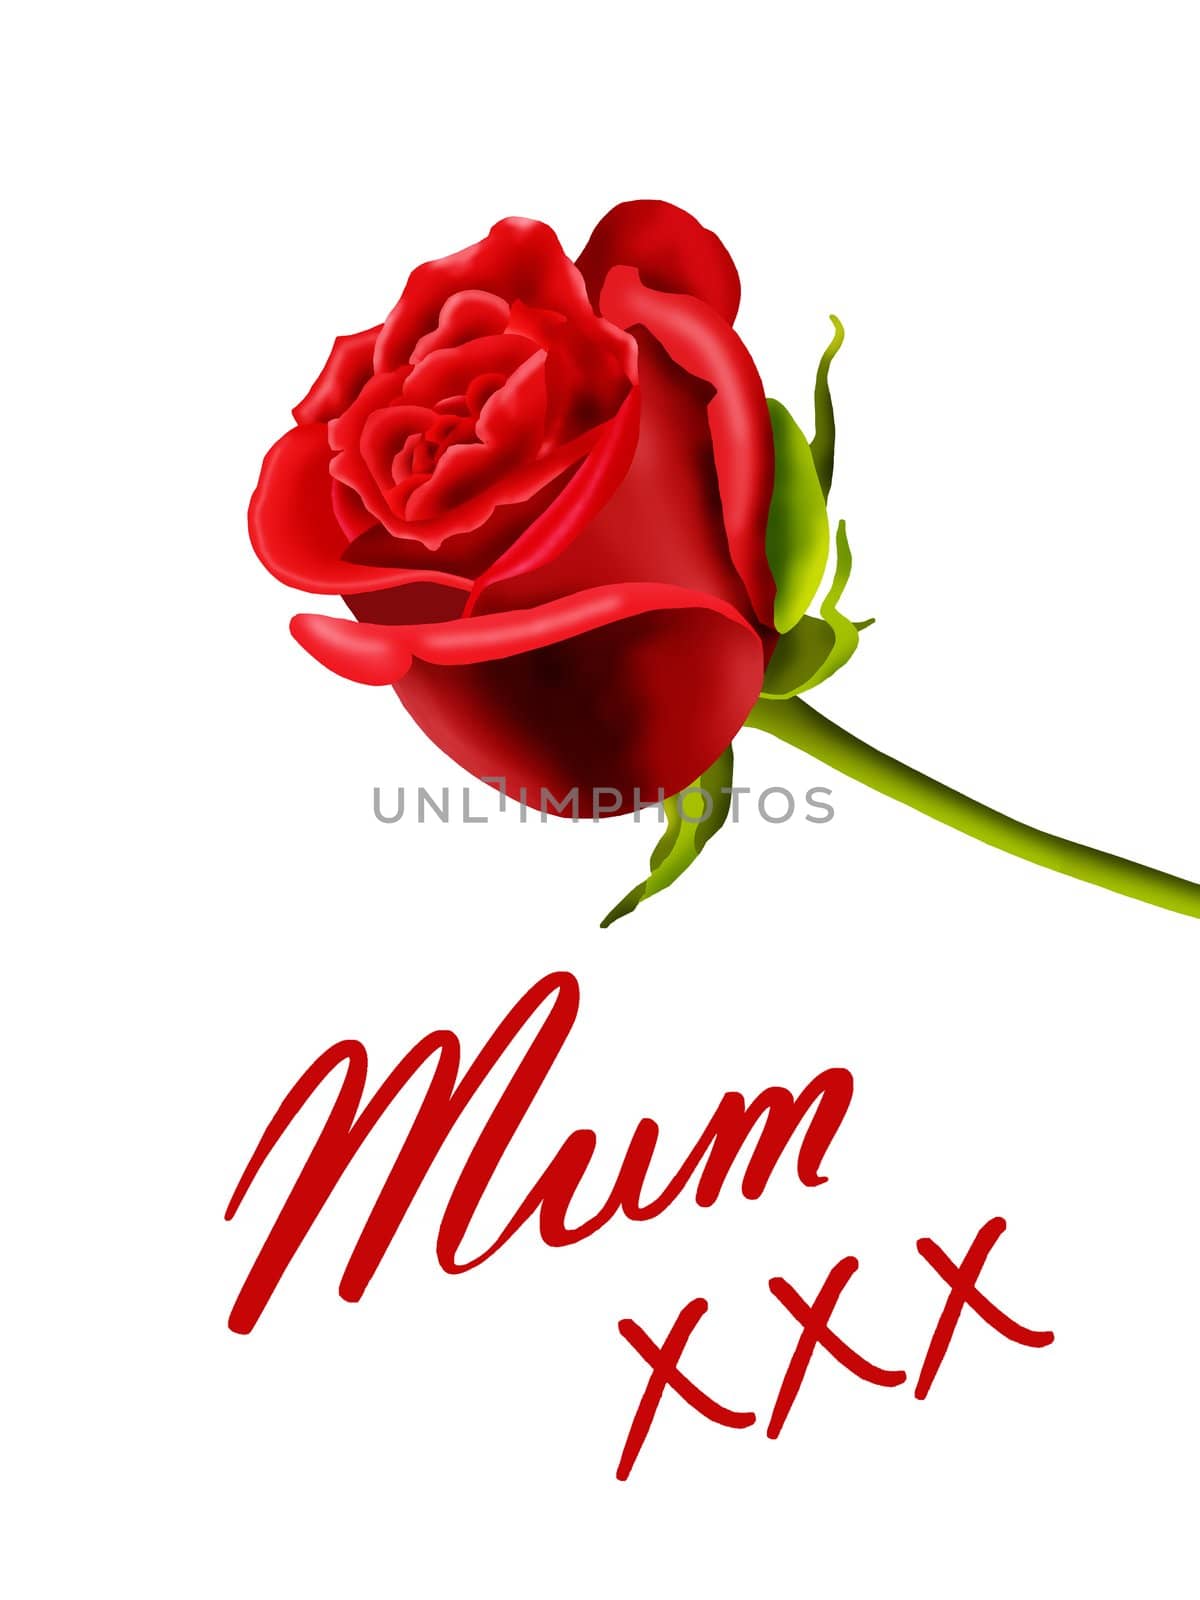 Birthday card for Mum with a single red rose isolated on a white background